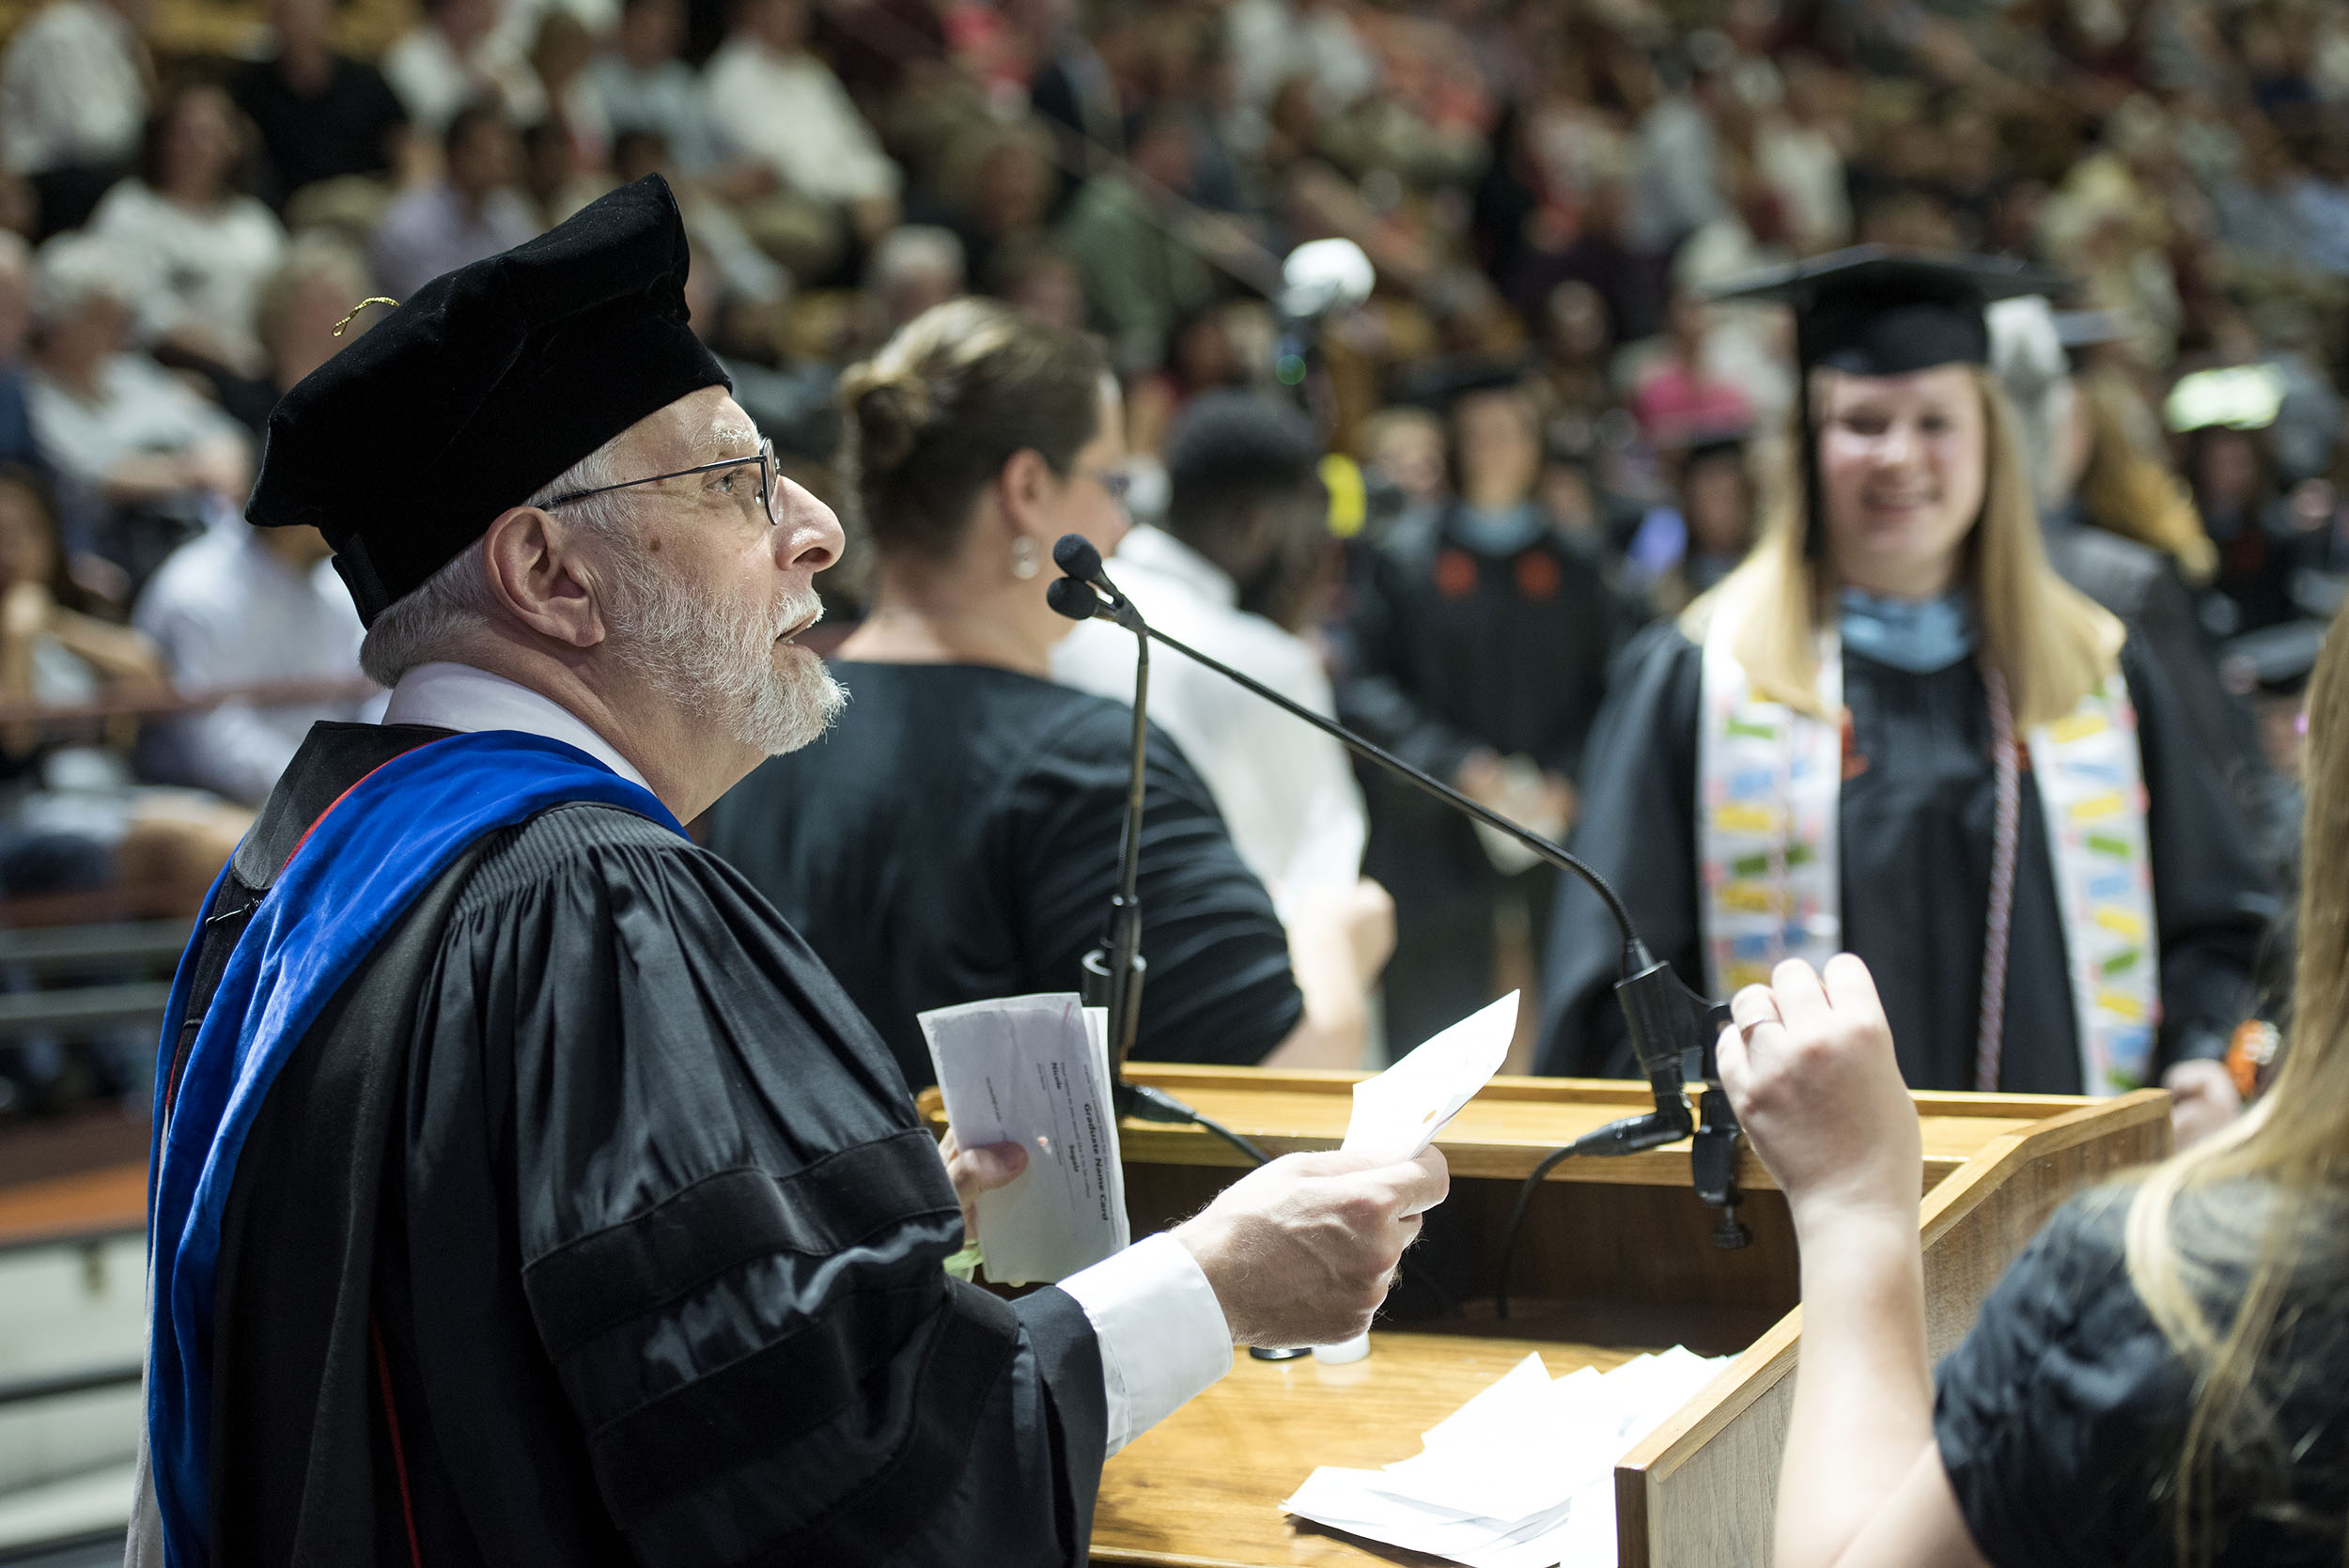 Joe Merola reads the names of graduates during the Graduate School Commencement Ceremony in Cassell Coliseum.